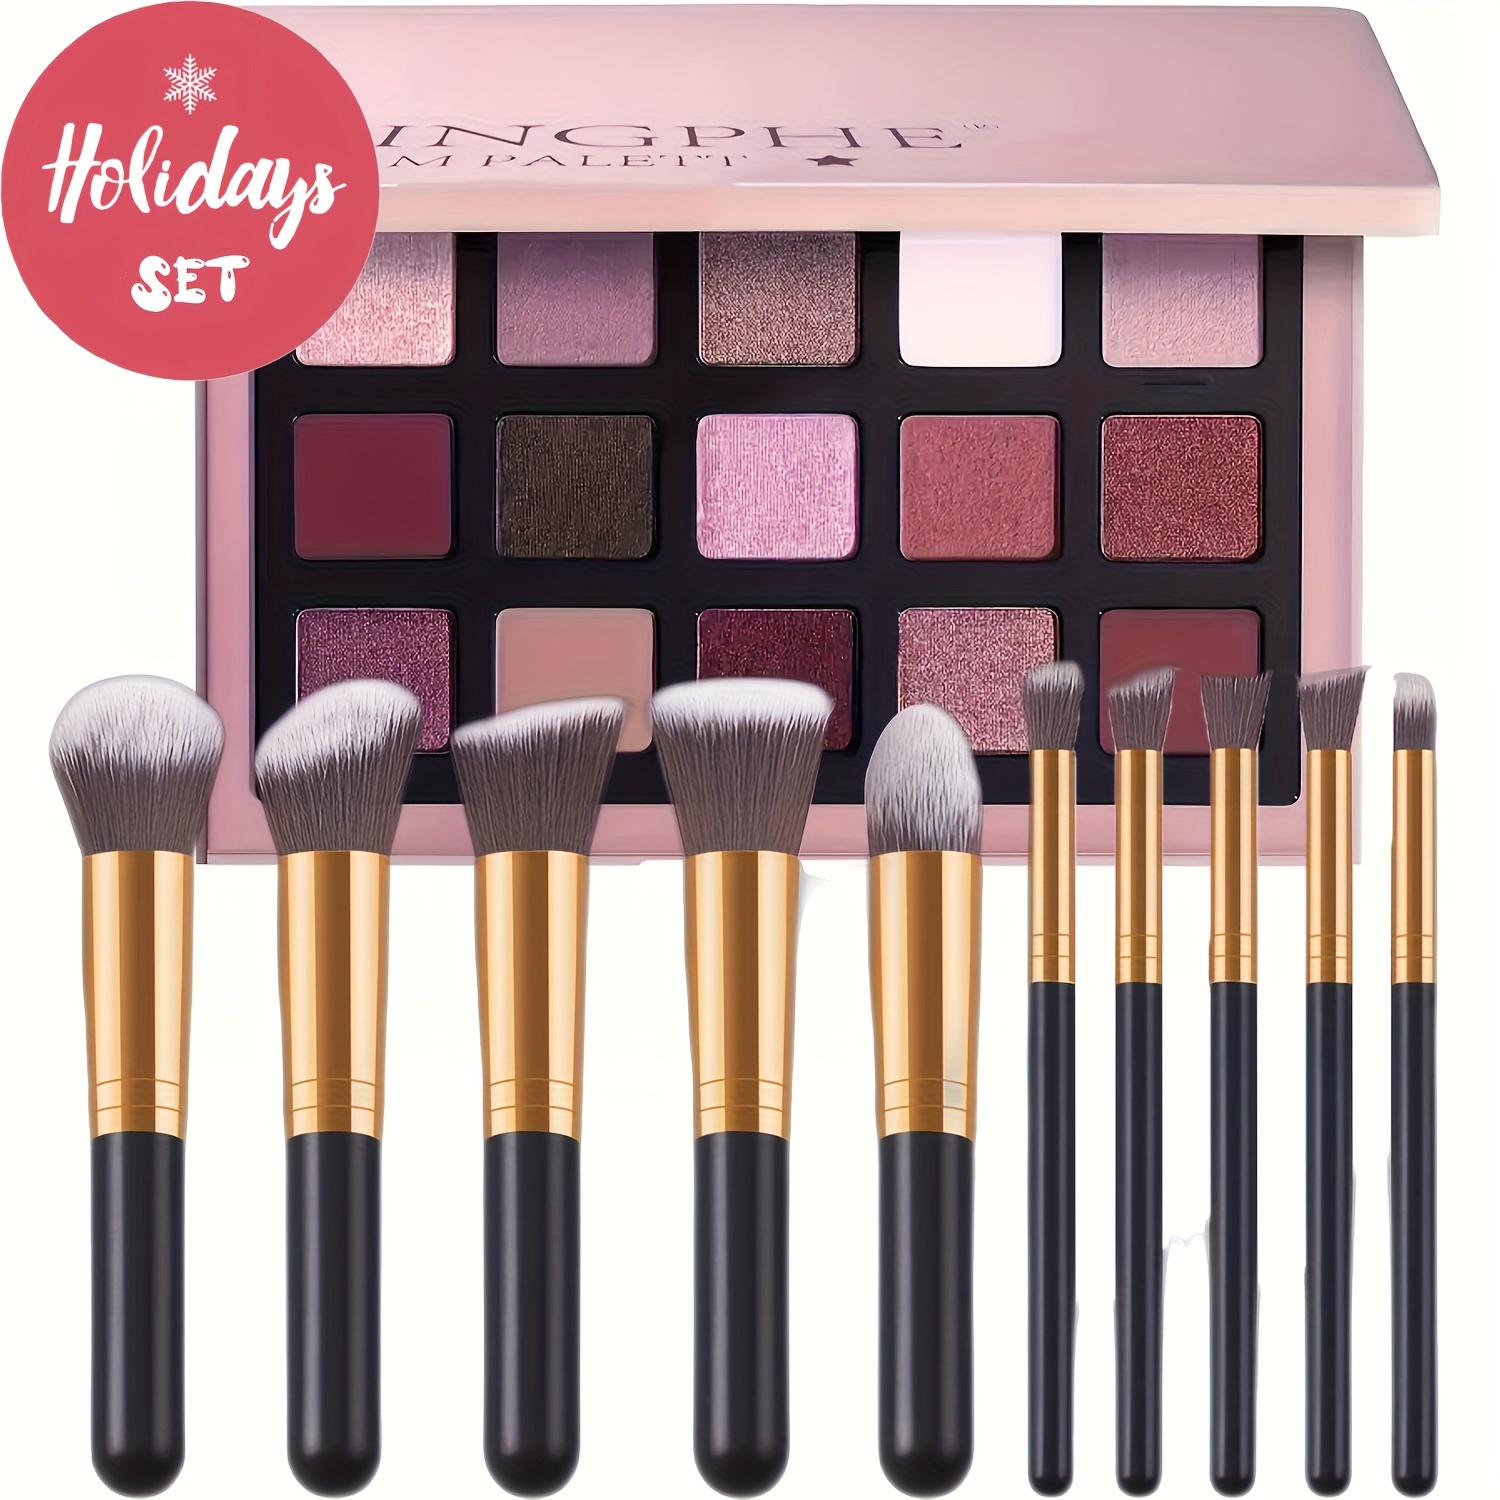 

15 Colors Purple Eyeshadow + 10 Brushes Set Eye Makeup Set, Shimmer Matte Finish Delicate Blendable Texture Eyeshadow, Valentine's Day Gift, Ideal For Mother's Day Makeup Set